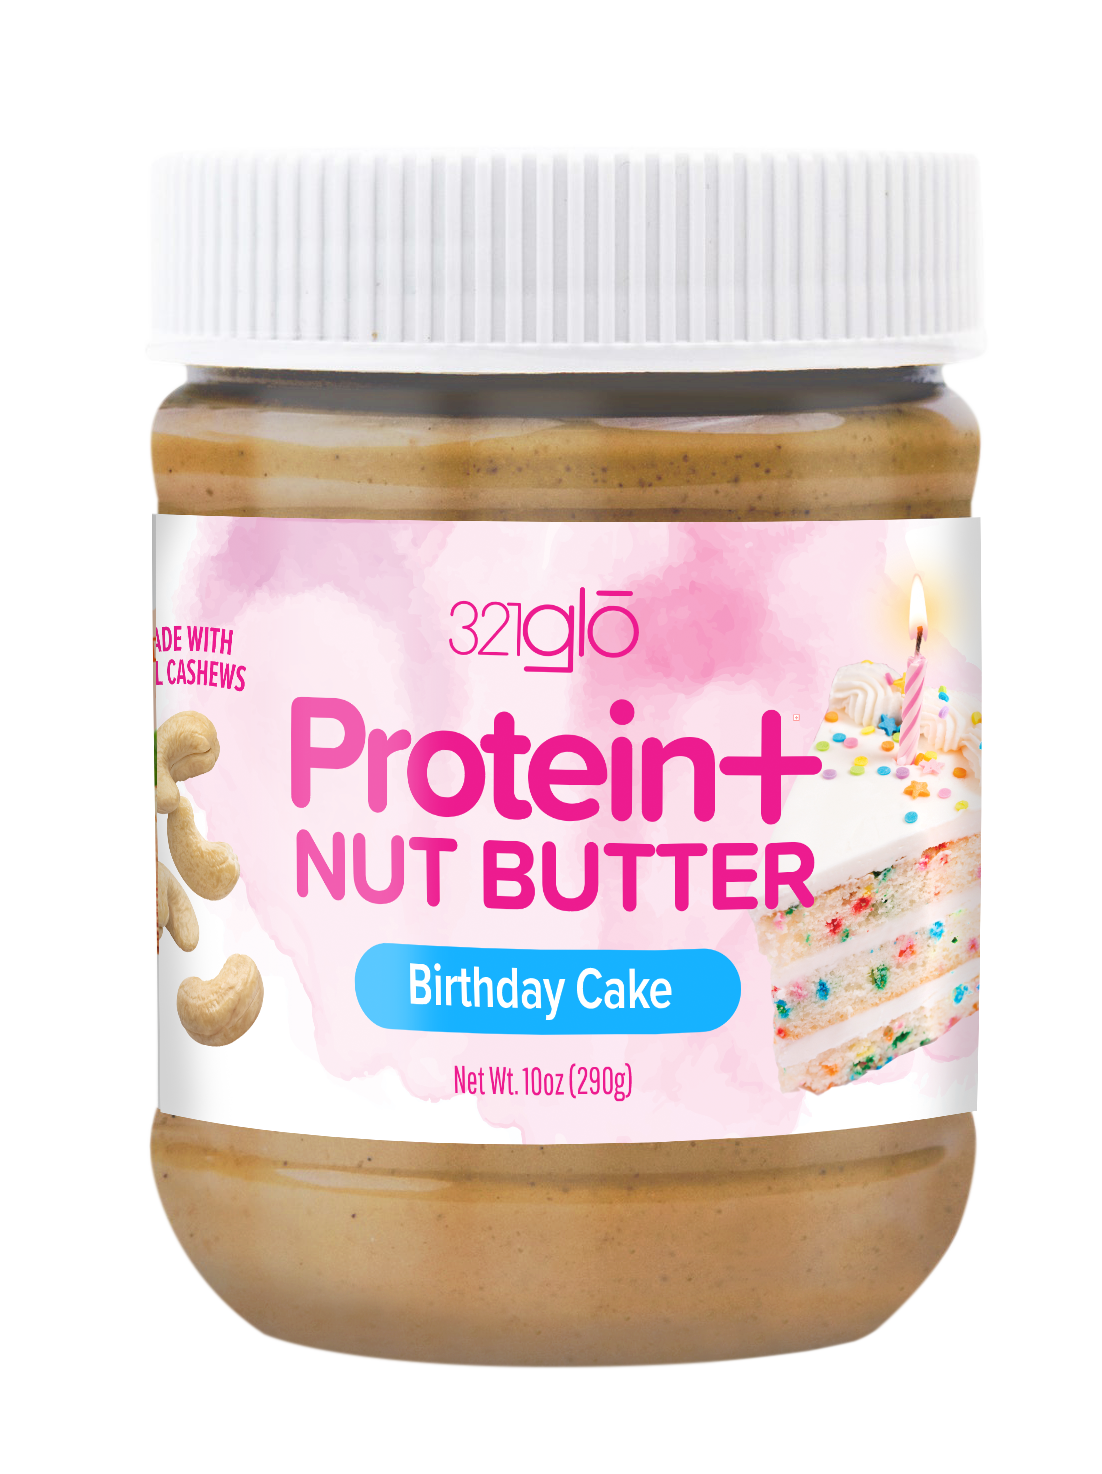 Birthday Cake Nut Butter Frosting (Free)